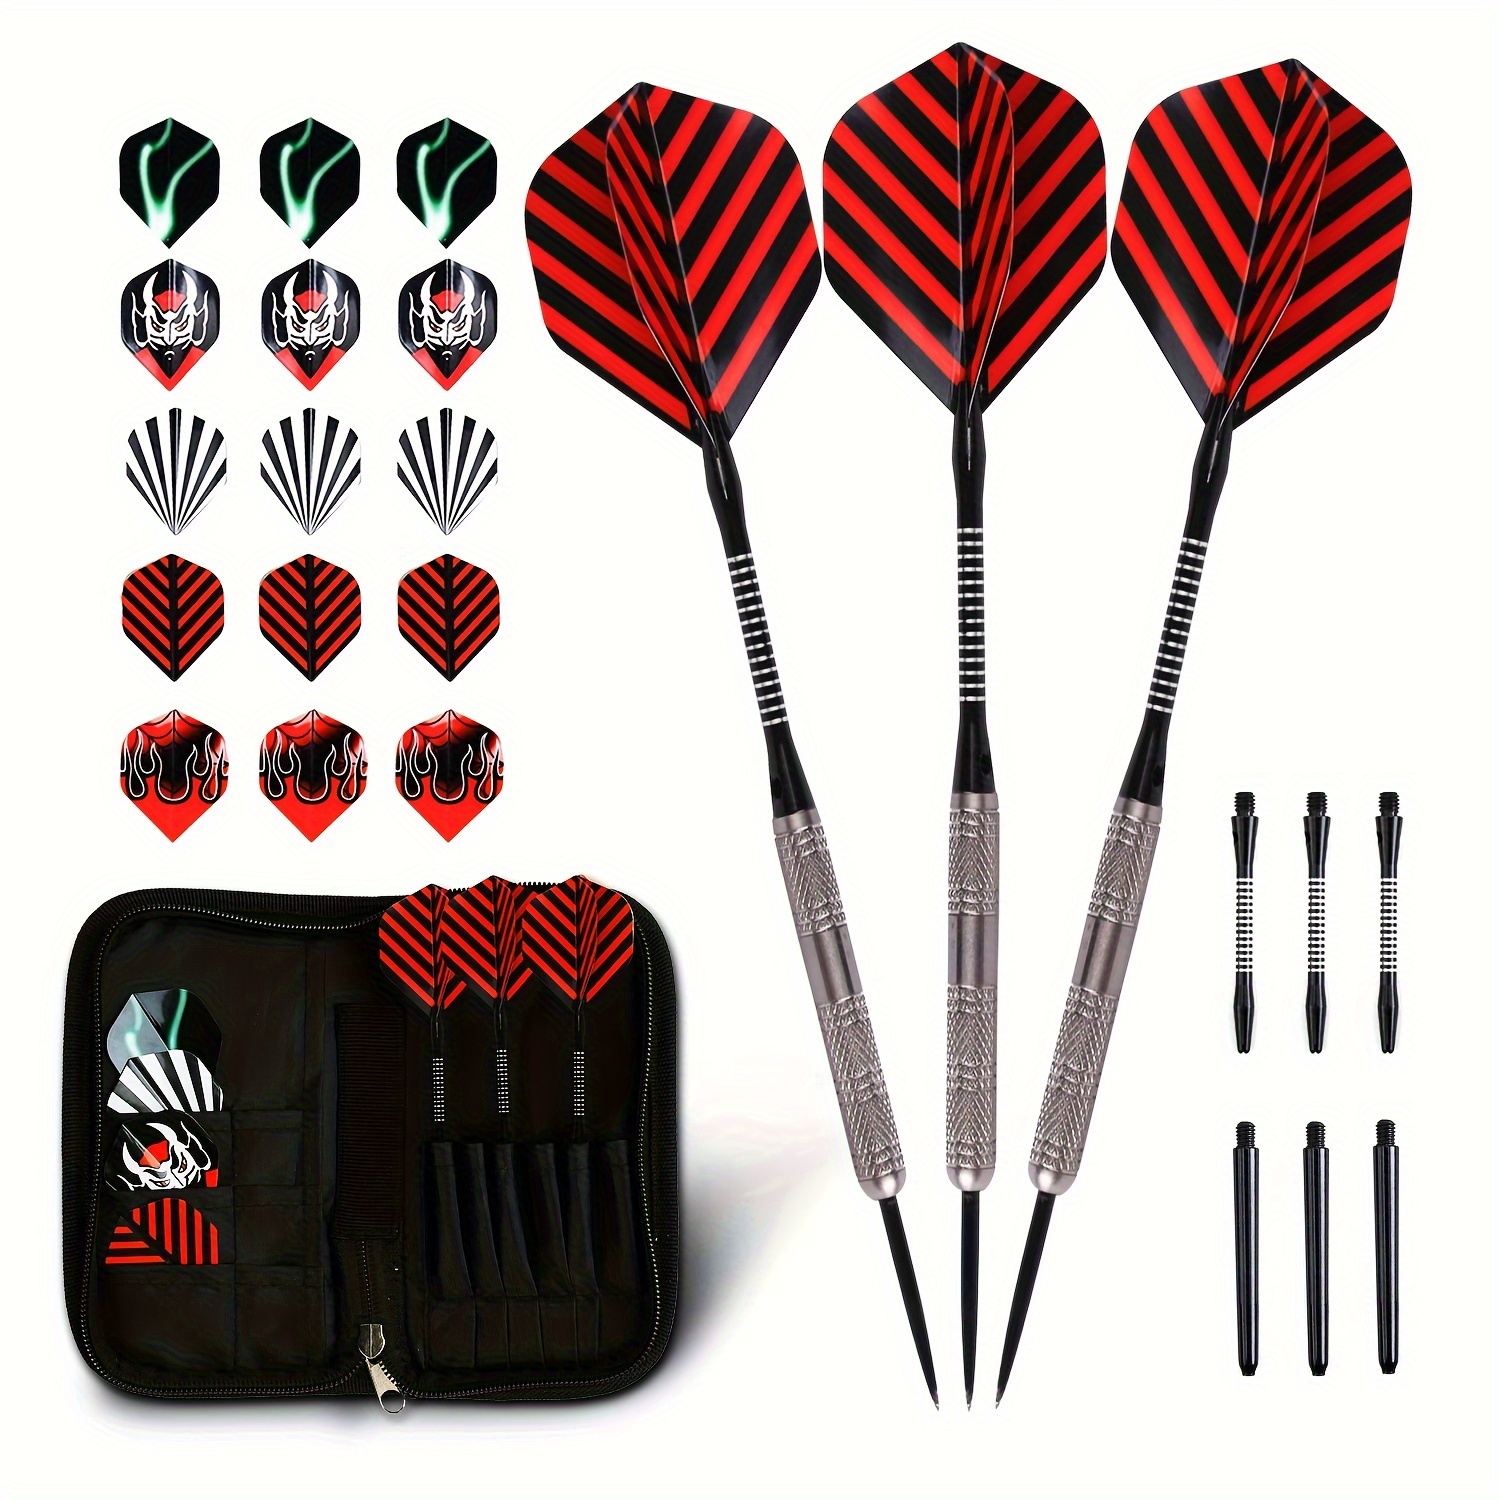 

Win.max 22g Tungsten Alloy Dart Set With Convertible Tungsten Steel Darts And Metal Tips Set In A Stylish And Exquisite Packaging